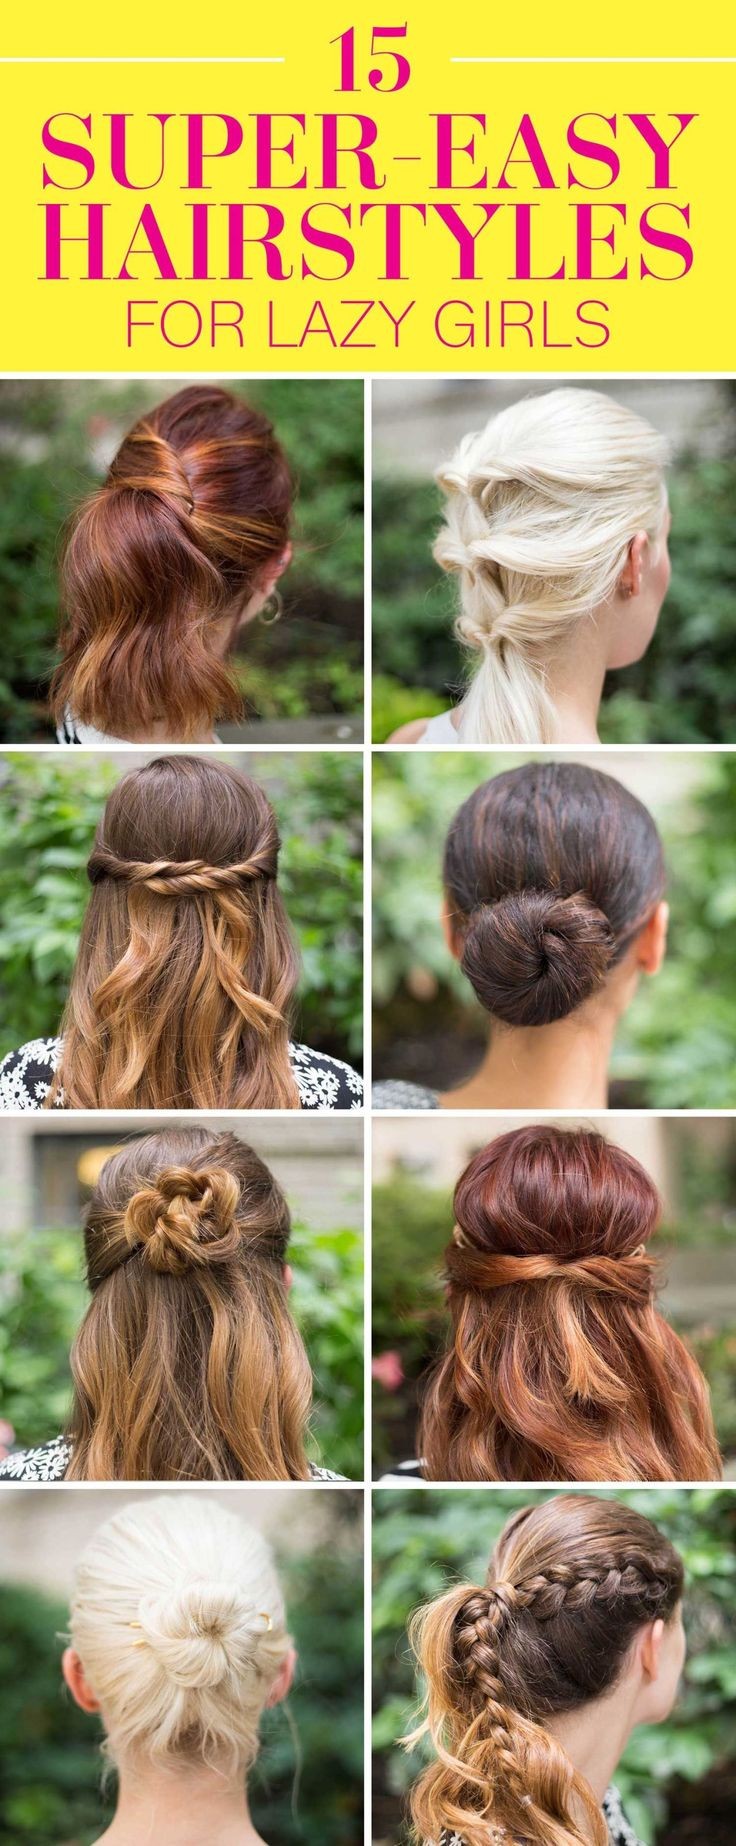 15 Super-Easy Hairstyles for Lazy Girls Who Can't...